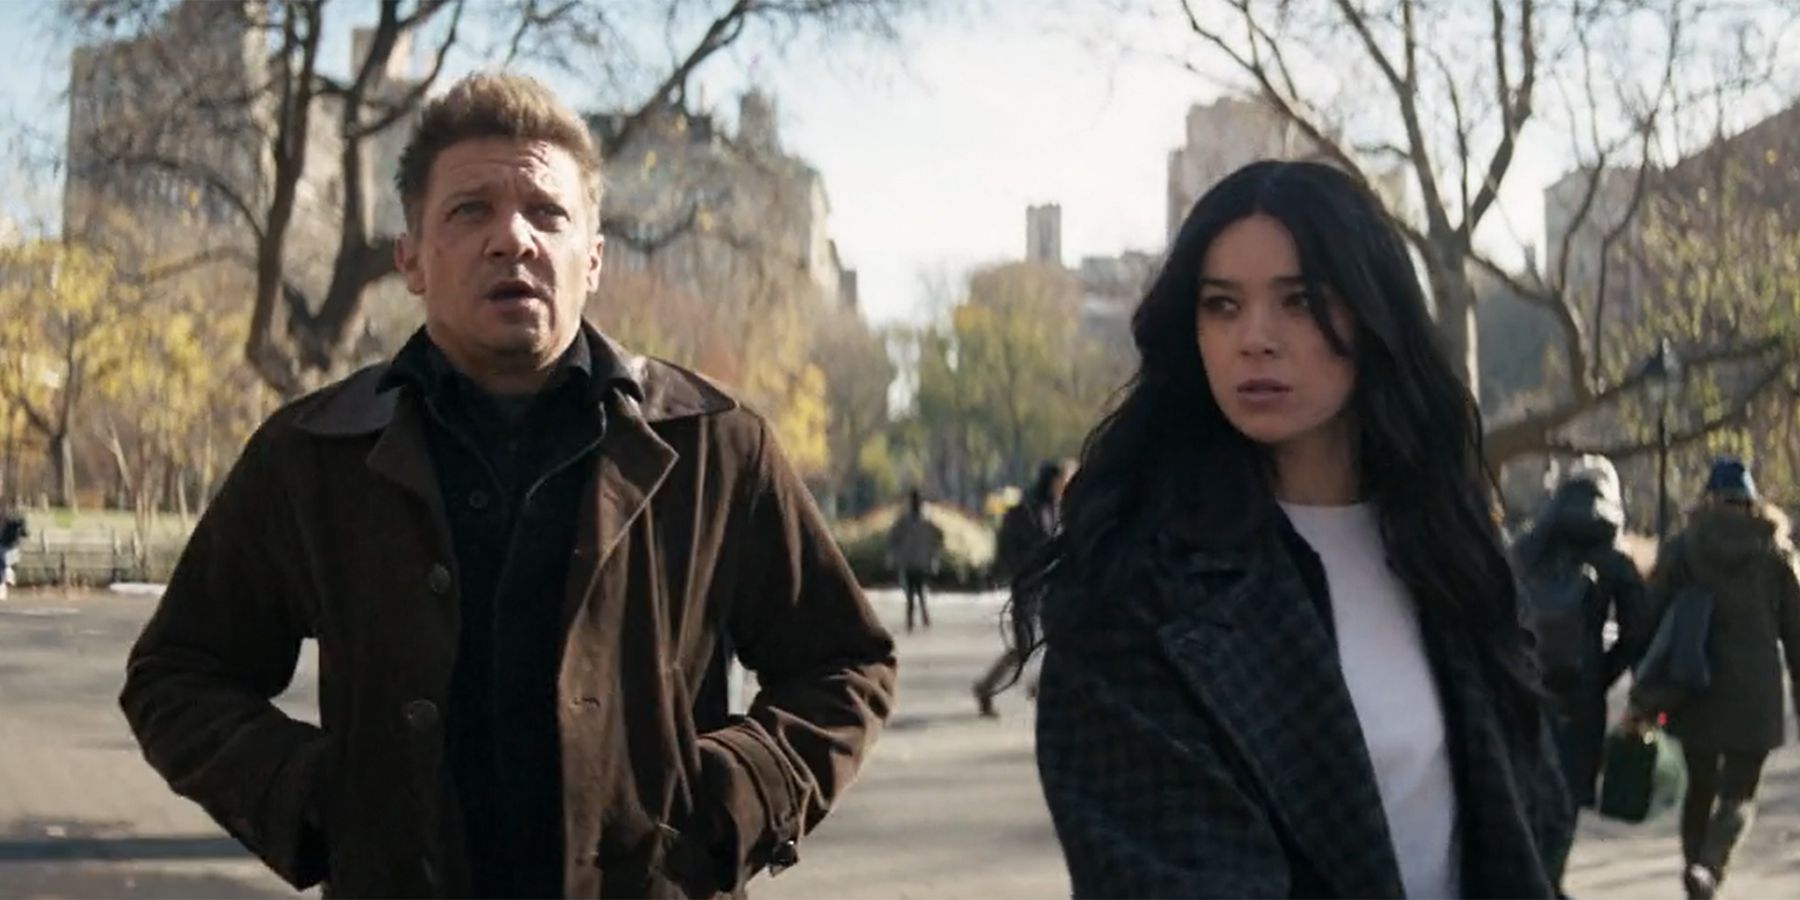 Clint Barton and Kate Bishop in episode 3 of Hawkeye